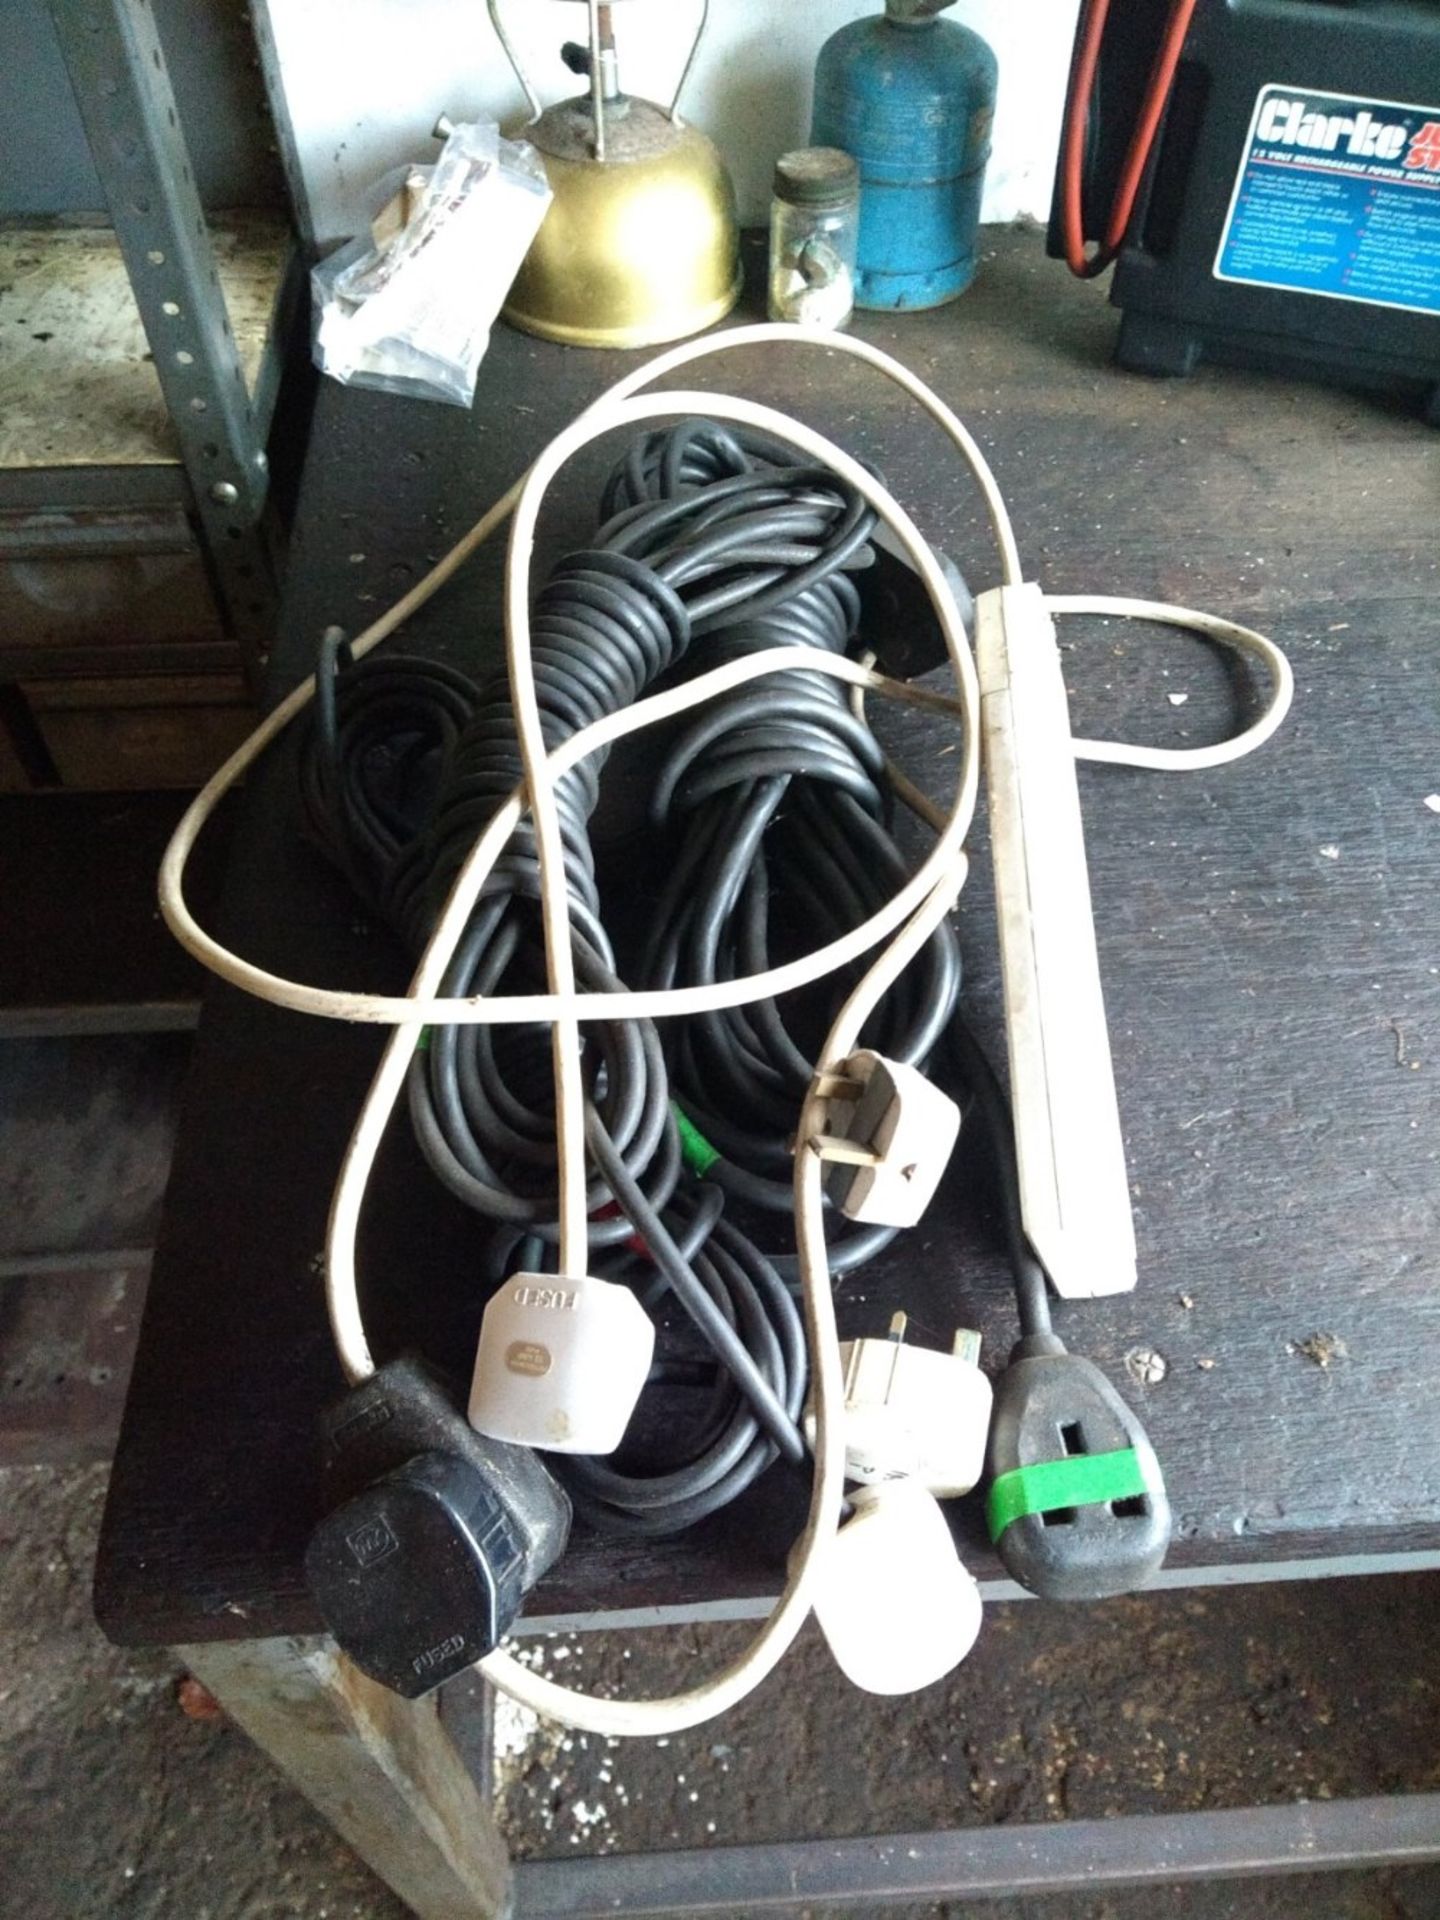 5 x extension leads of various lengths - PAT Test 2 x PASSED (14/03/19) 3 x FAILED (Damaged plug